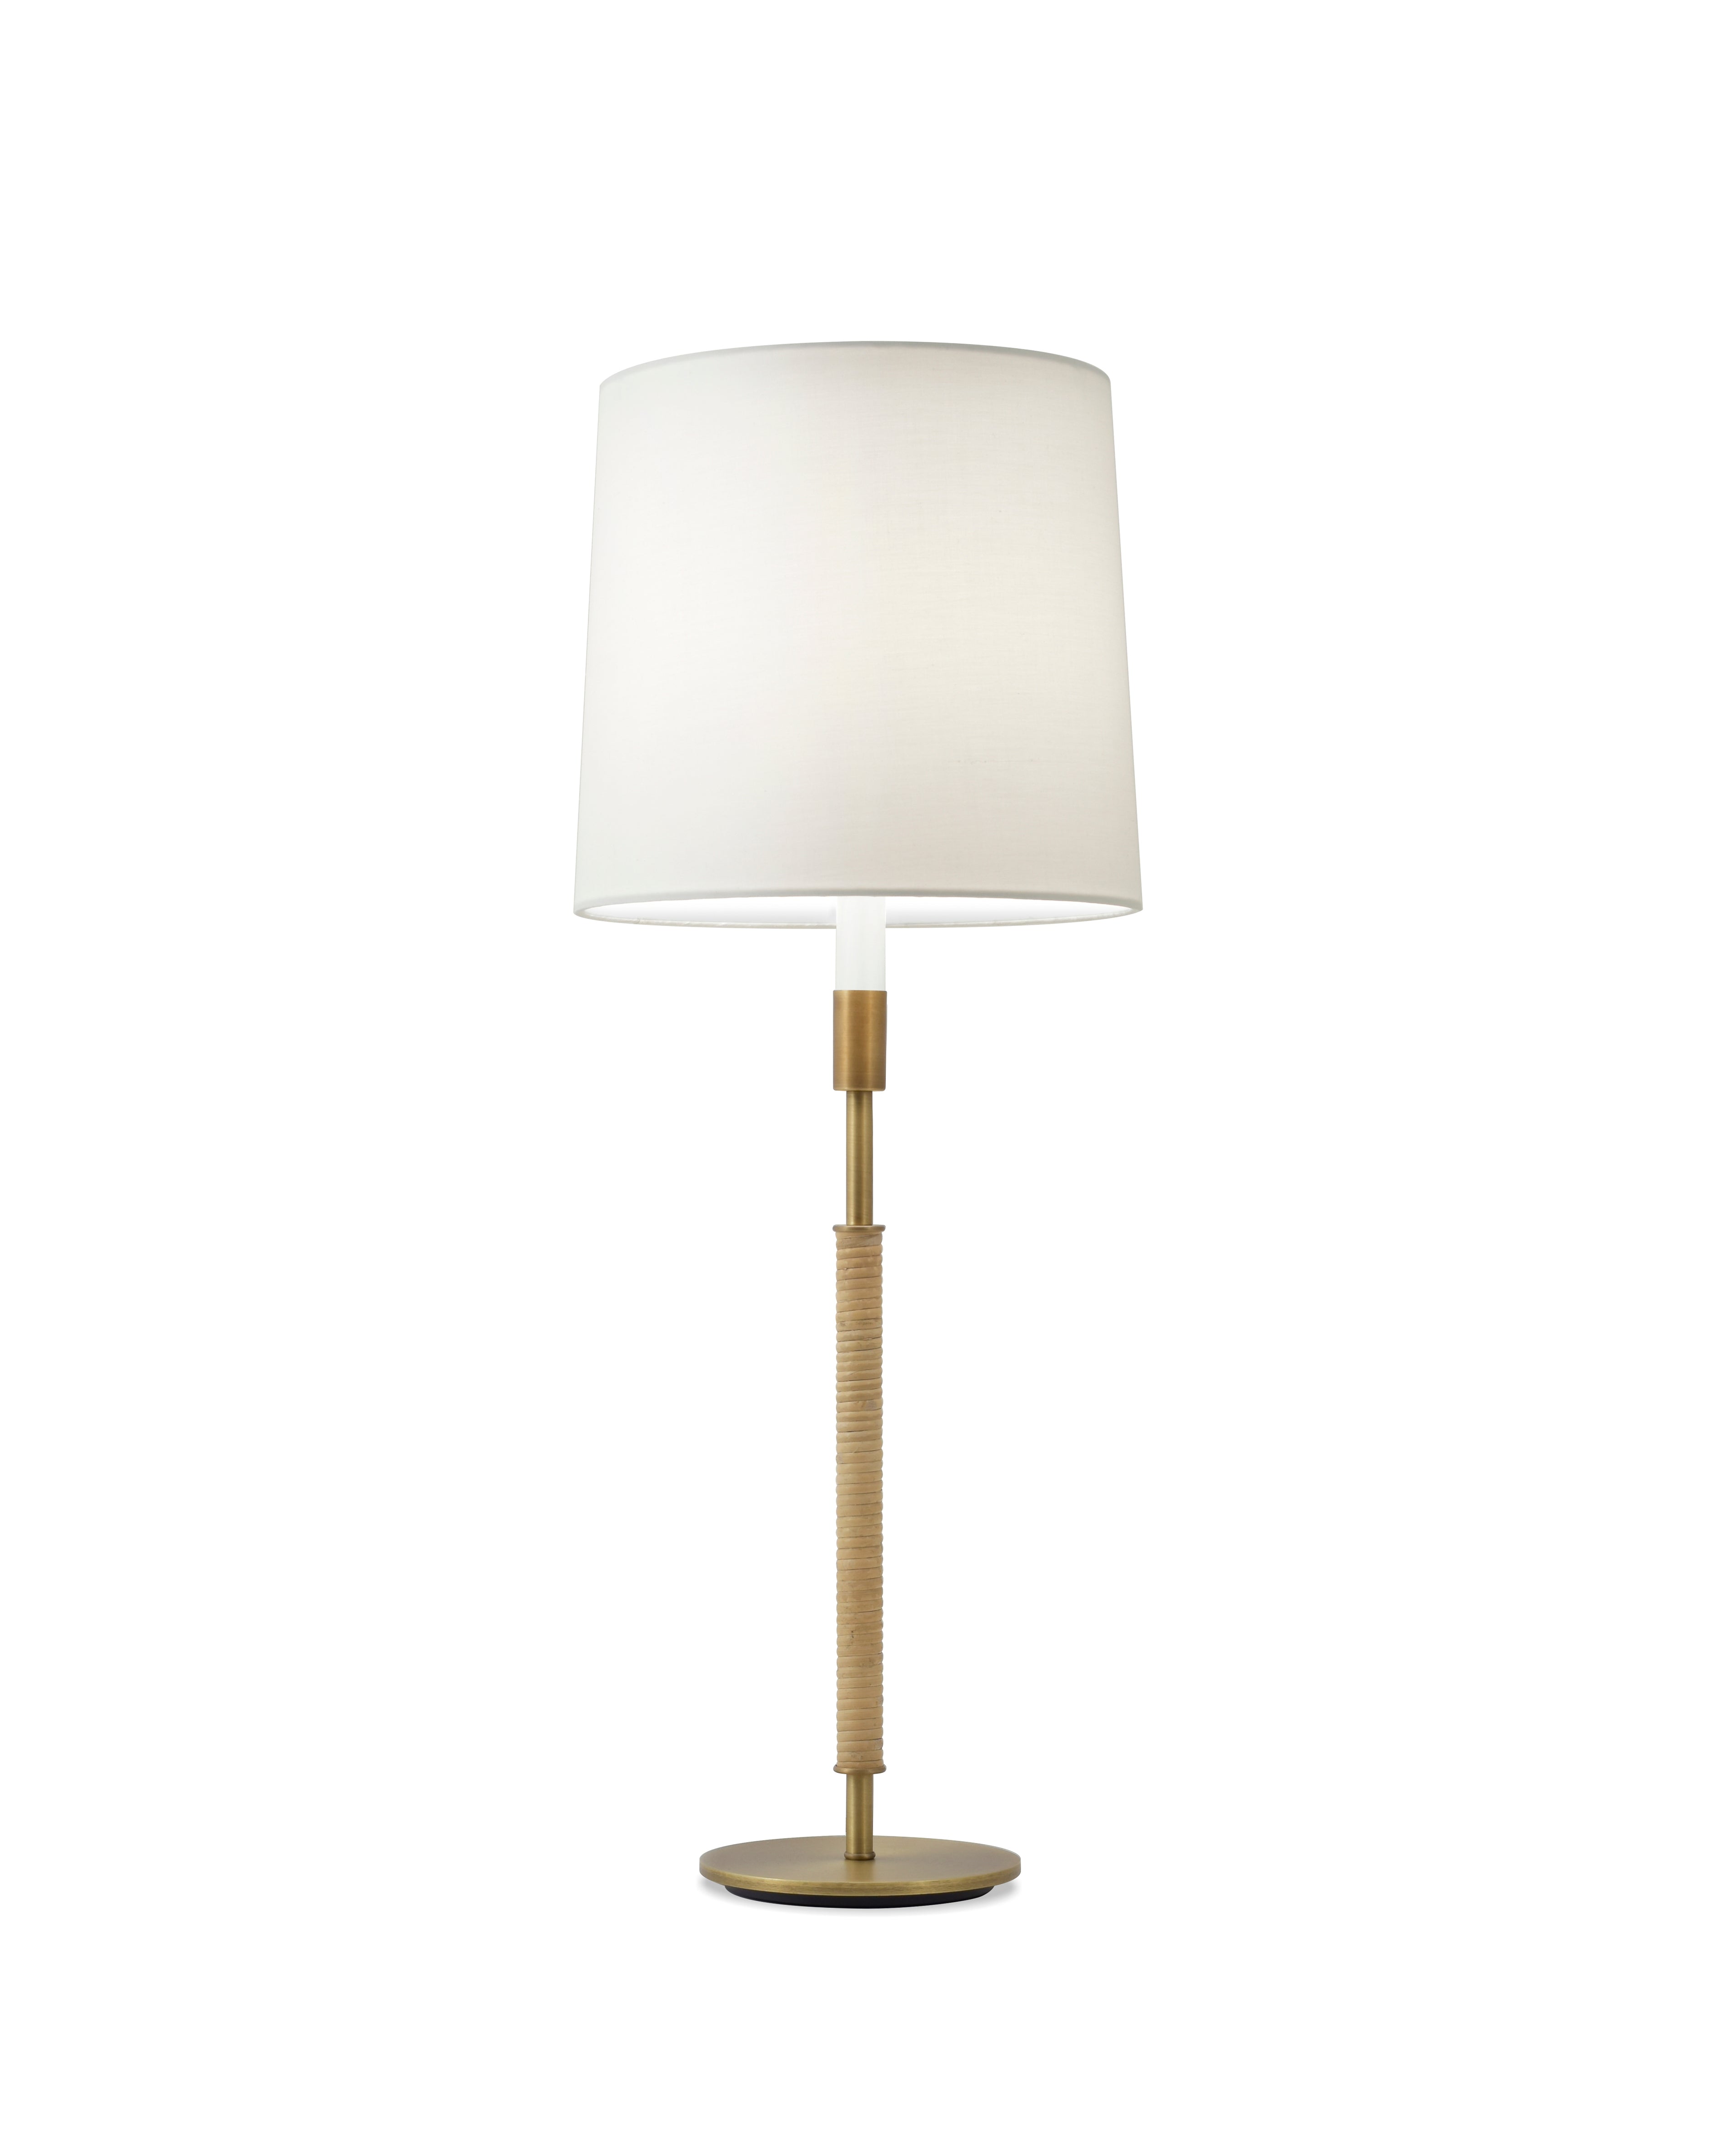 Light Antique Brass and Cane with White Silk Pongee Shade